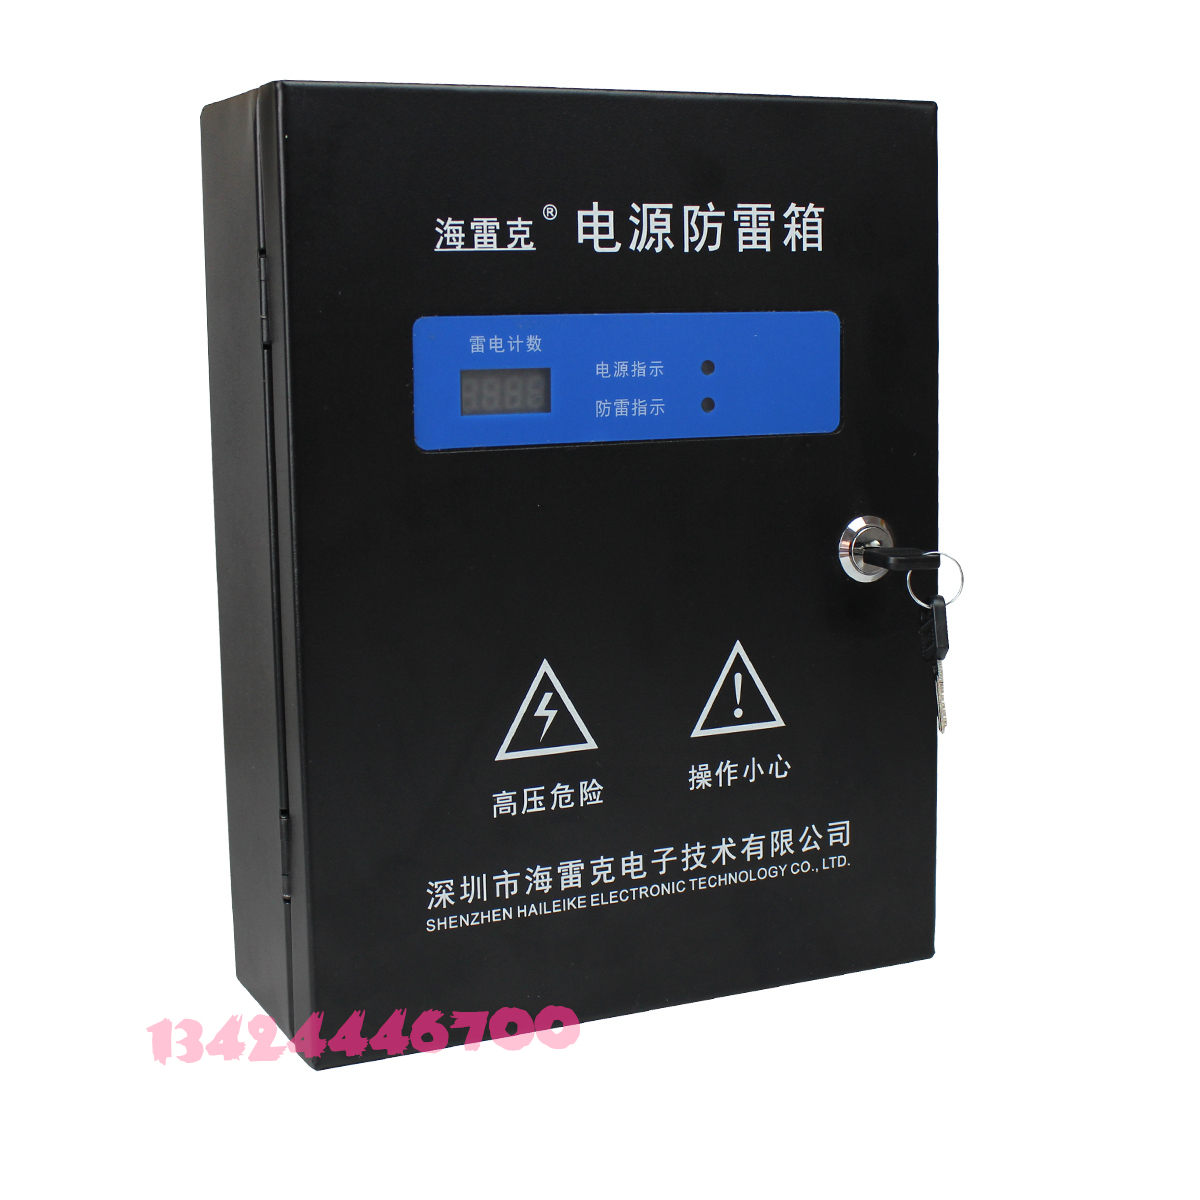 120 96 Helox Single Phase Power Supply Lightning Protection Box 220v 40ka Power Supply Lightning Protection Box With Lightning Counter Pps 040 W From Best Taobao Agent Taobao International International Ecommerce Newbecca Com